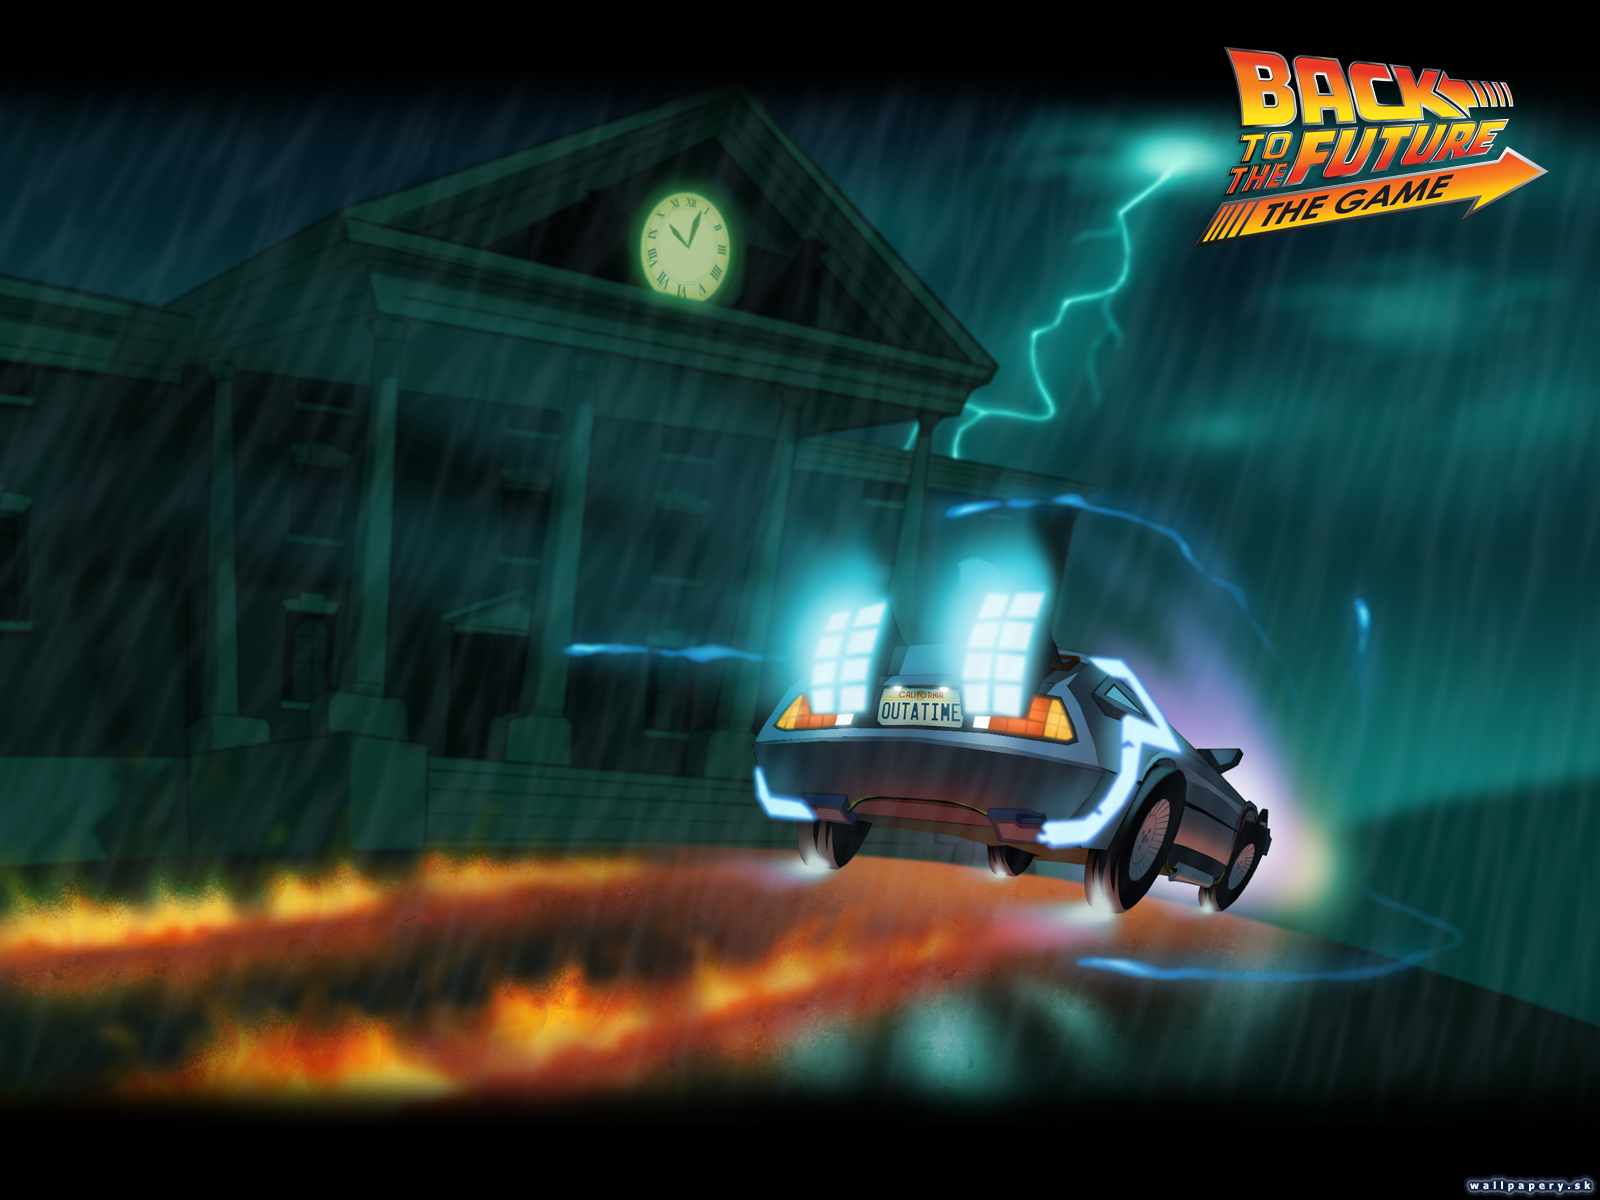 Back to the Future: The Game - It's About Time - wallpaper 3